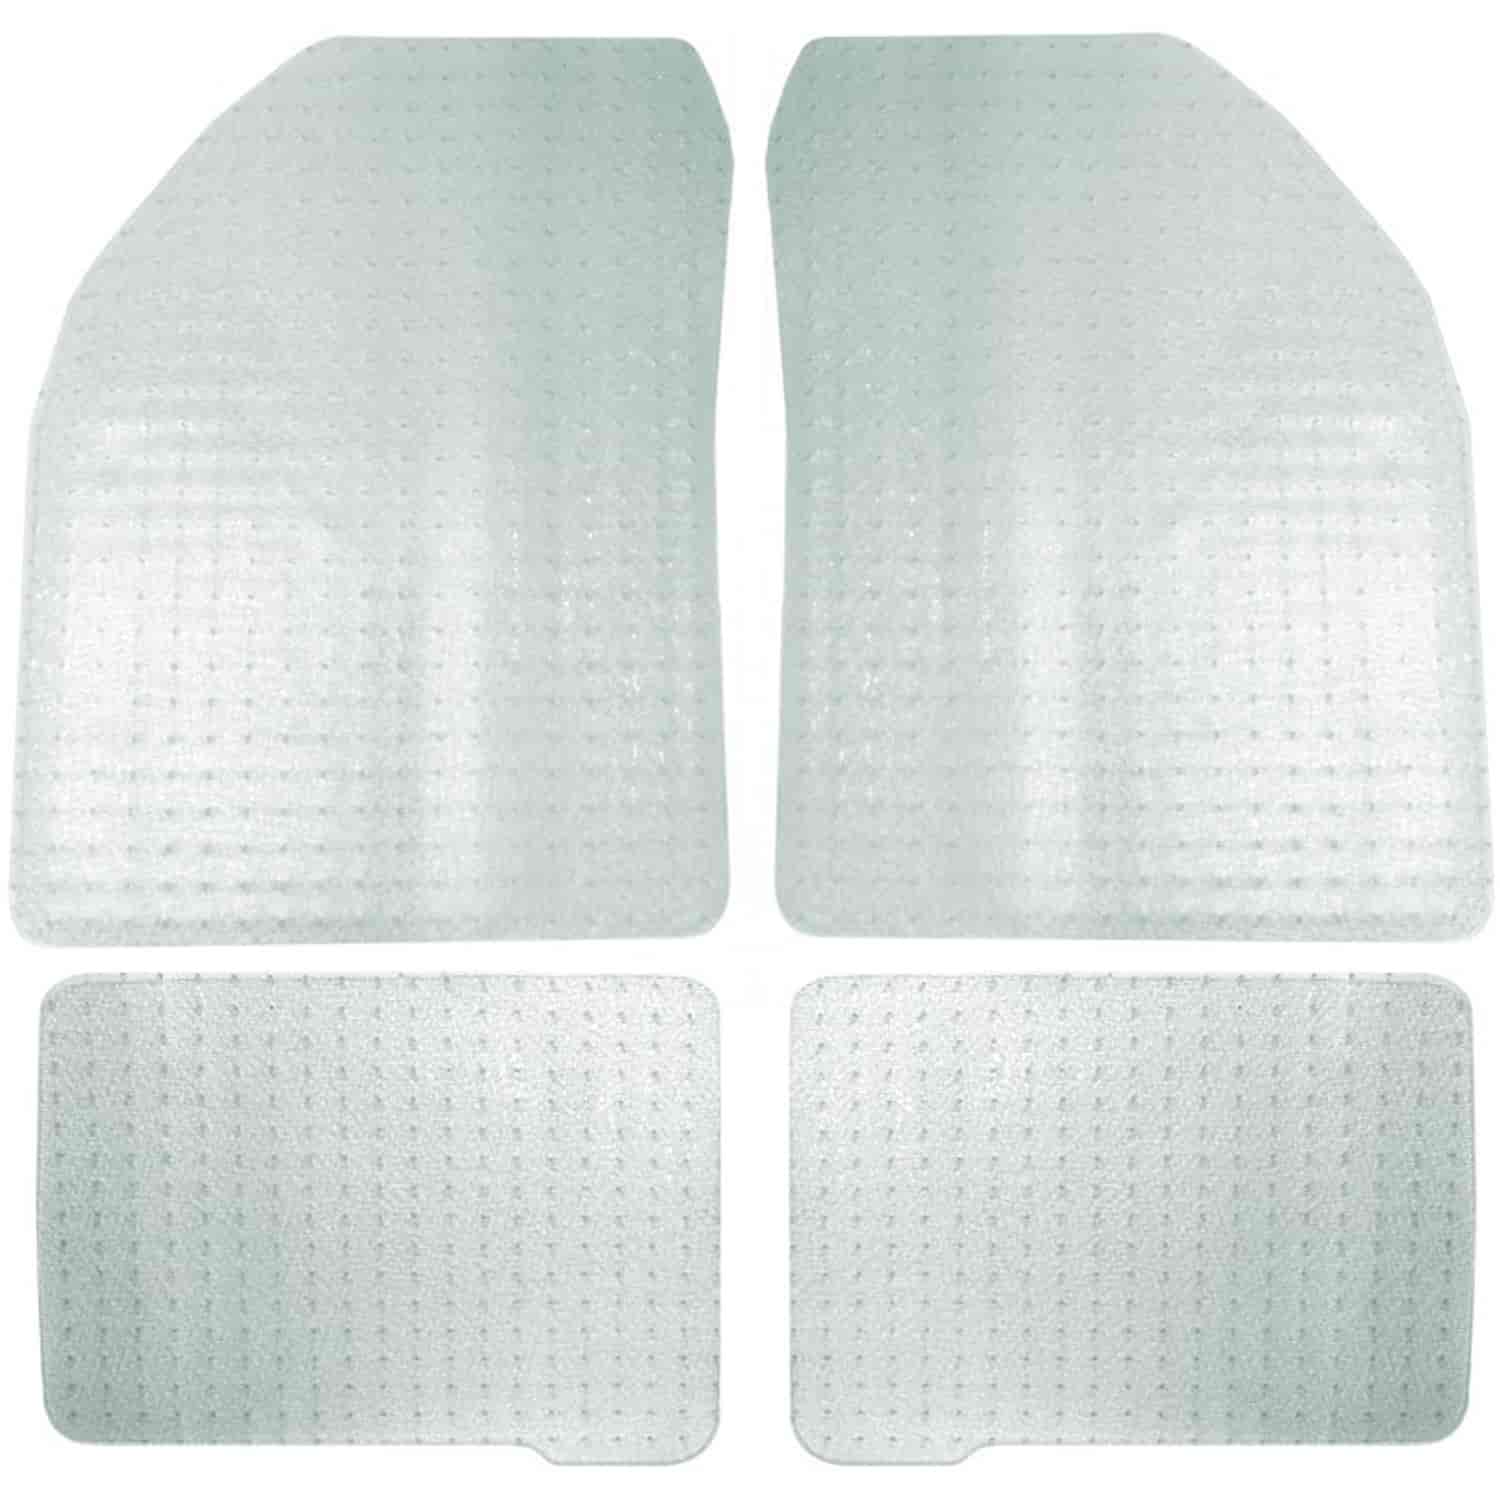 Clear Vinyl Floor Mats Custom engineered to fit your vehicle